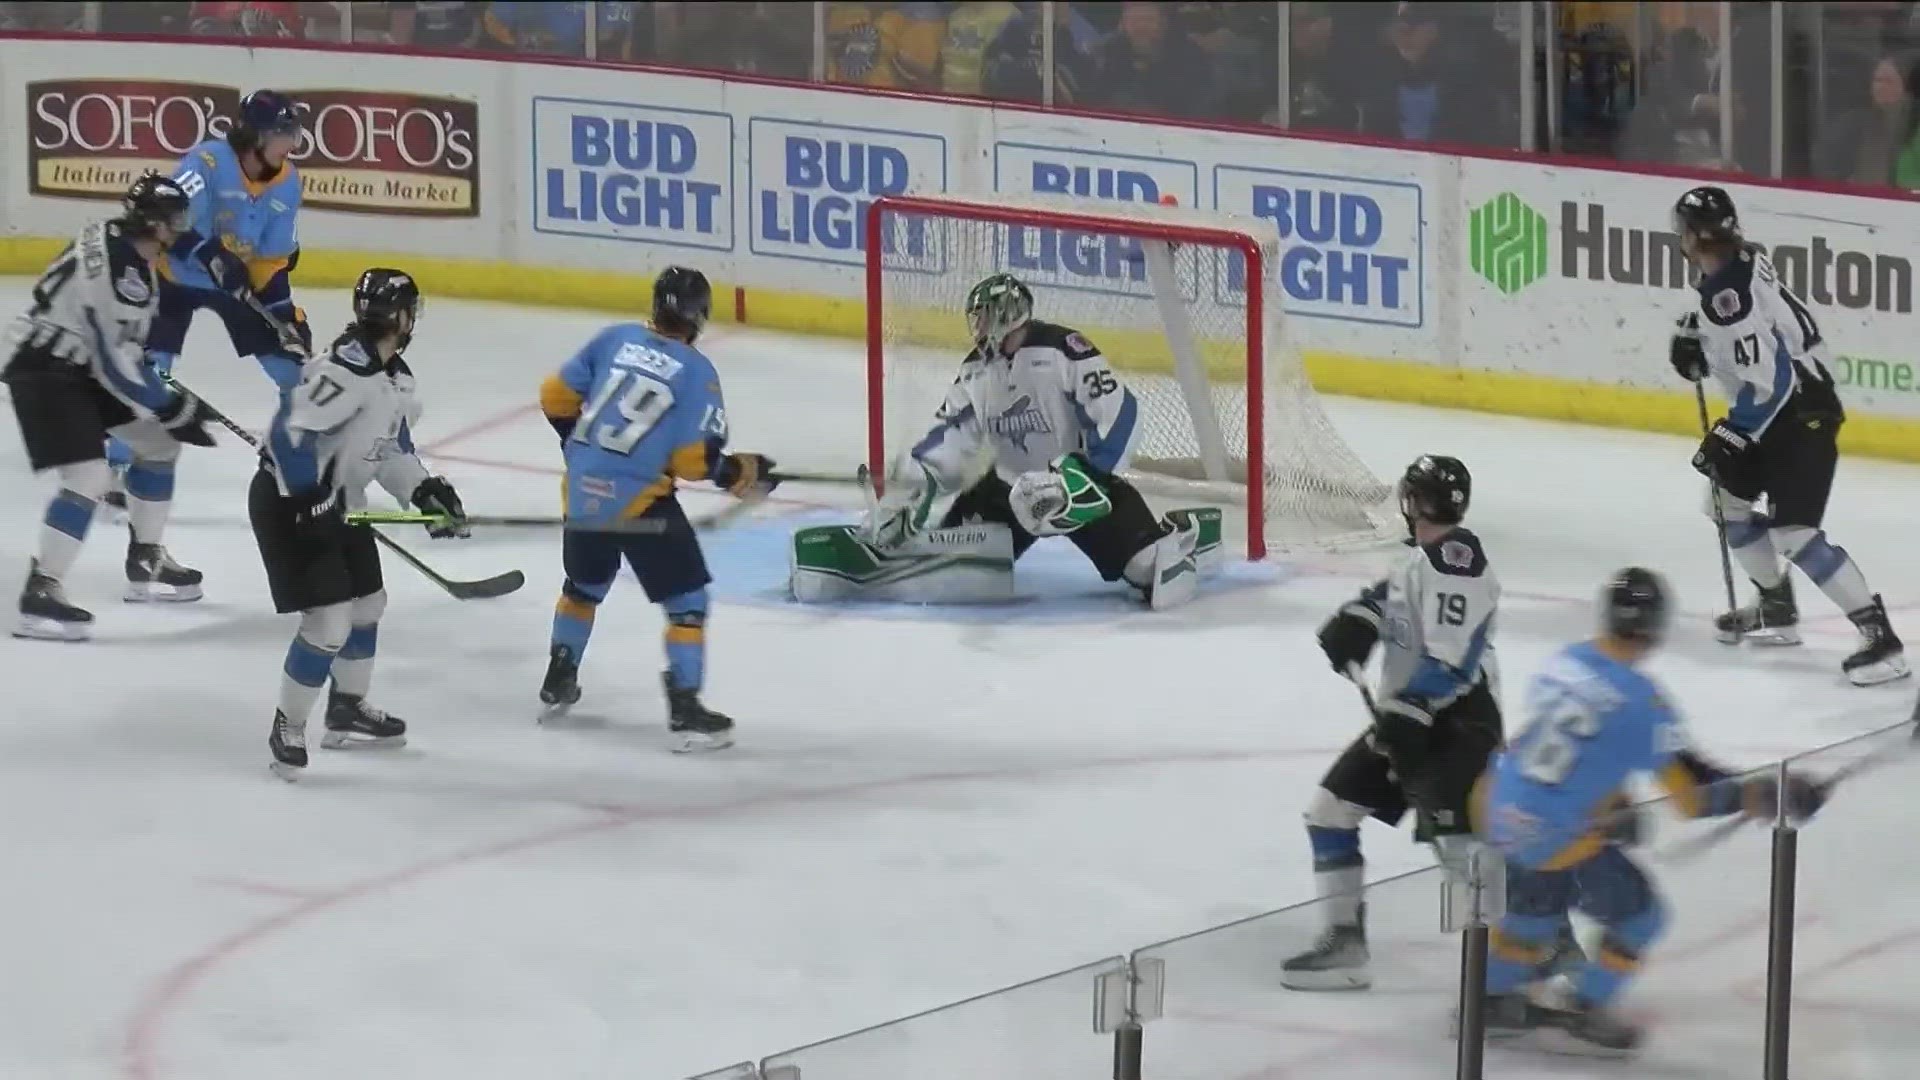 The Toledo Walleye fell 4-3 to the Idaho Steelheads Friday night, despite strong goaltending from John Lethemon and goal-scoring  prowess from Gordie Green.